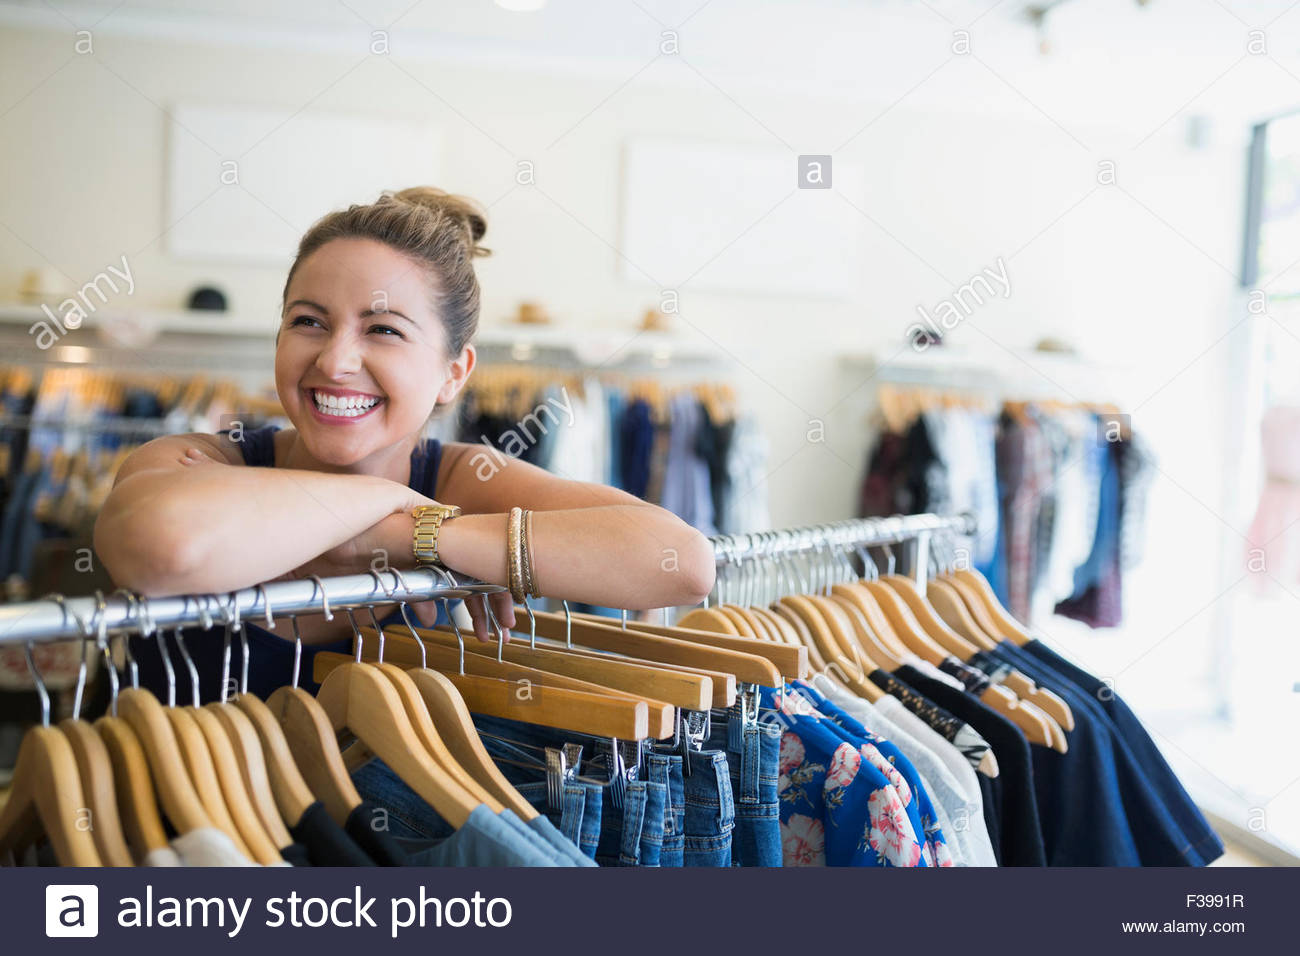 Portrait enthusiastic woman in clothing shop Stock Photo